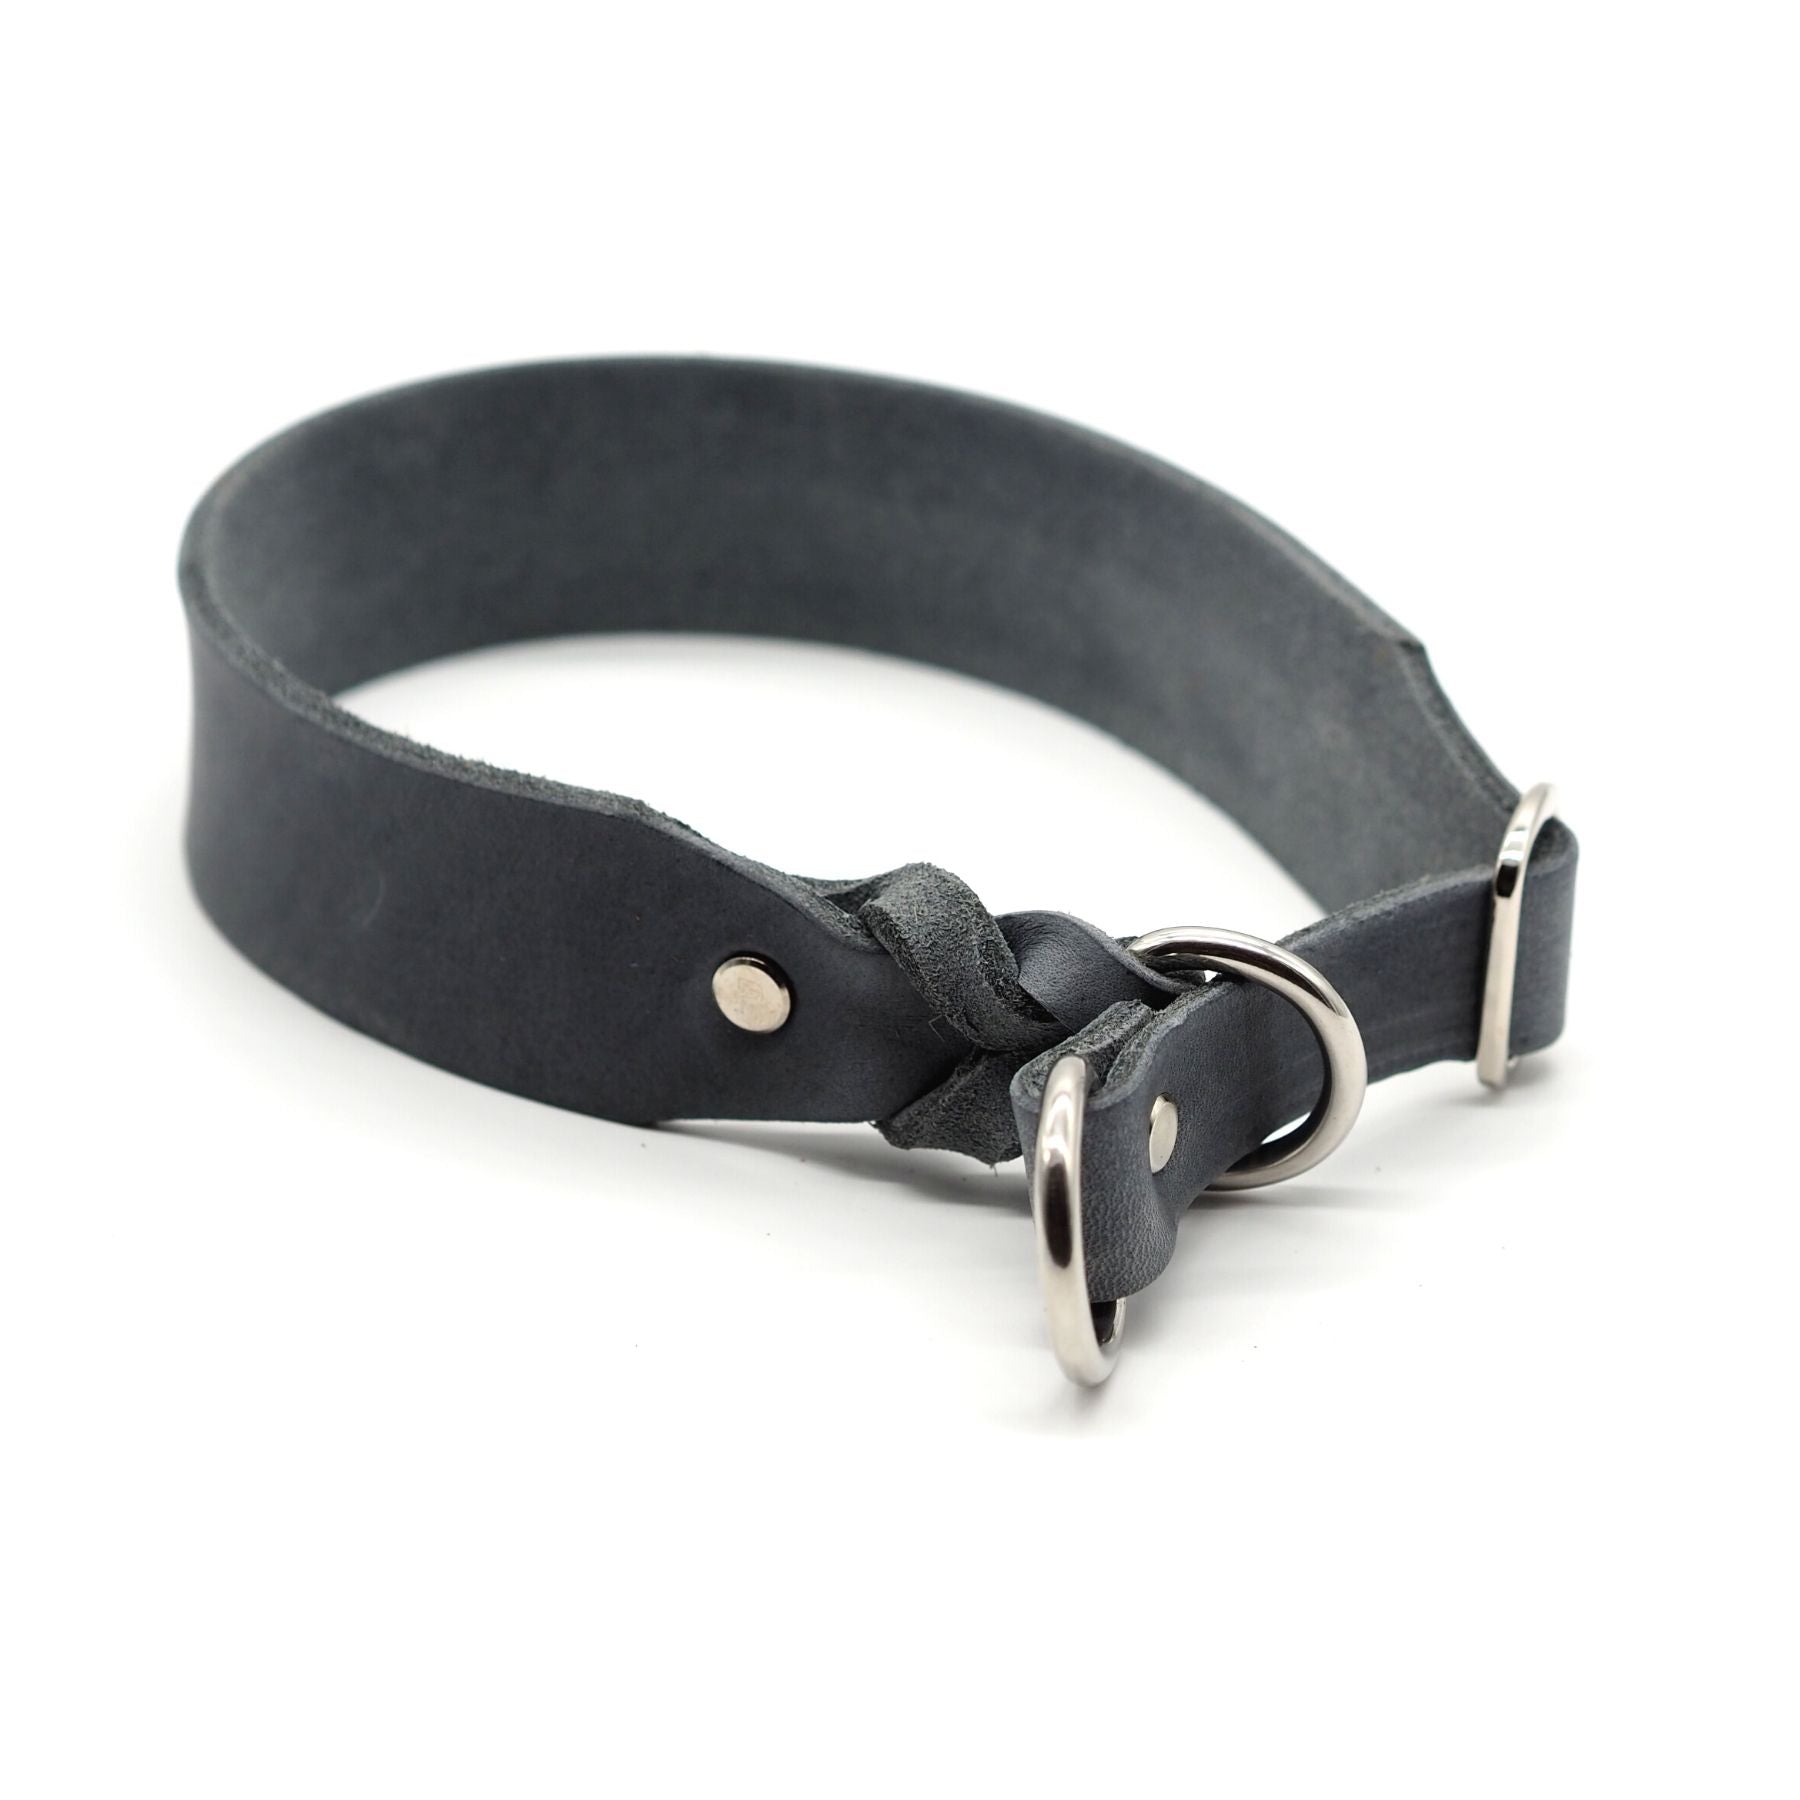 Pull stop collar made of greased leather 'Stone Grey'